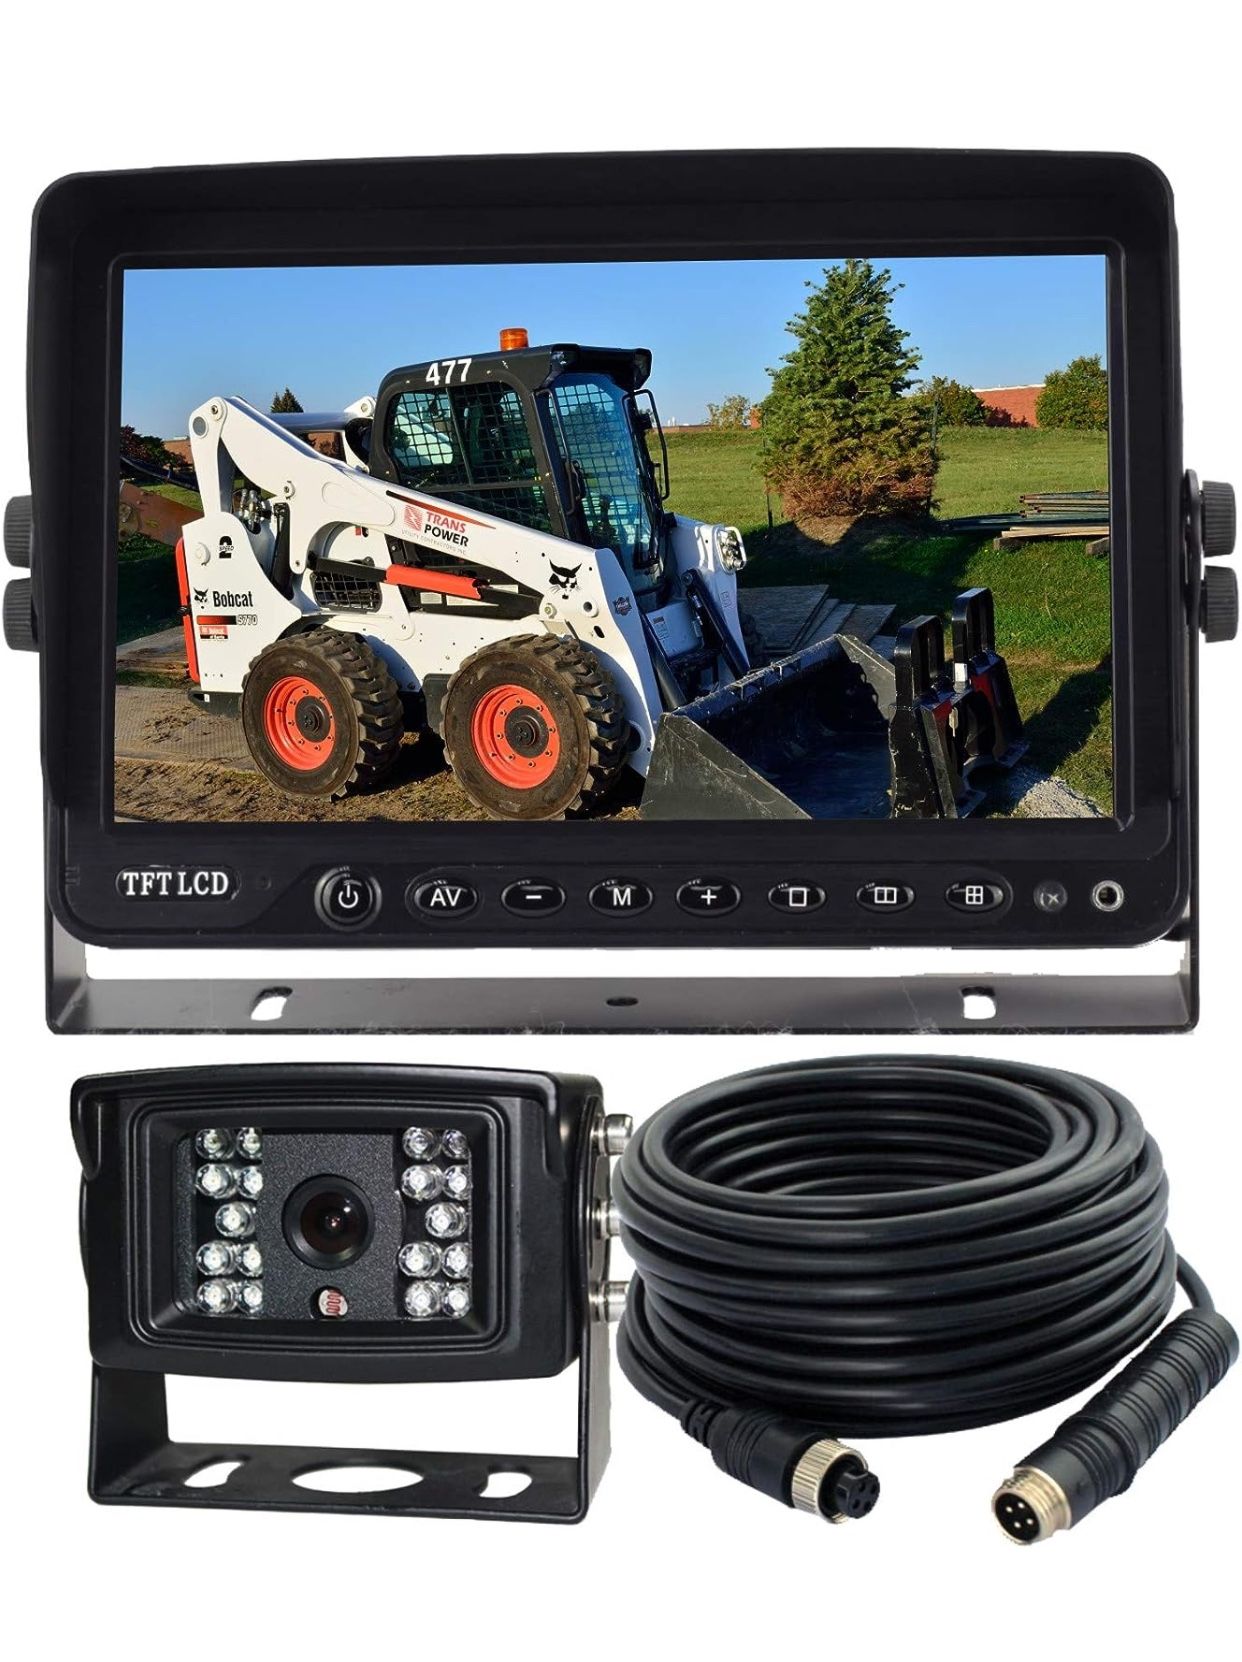 720P 7" Reverse Rear View Backup Camera System, Camera with Night Vision Waterproof IP69K Vibration-Proof 10G for Tractor/Truck/Bus/Motorhome/Excavato